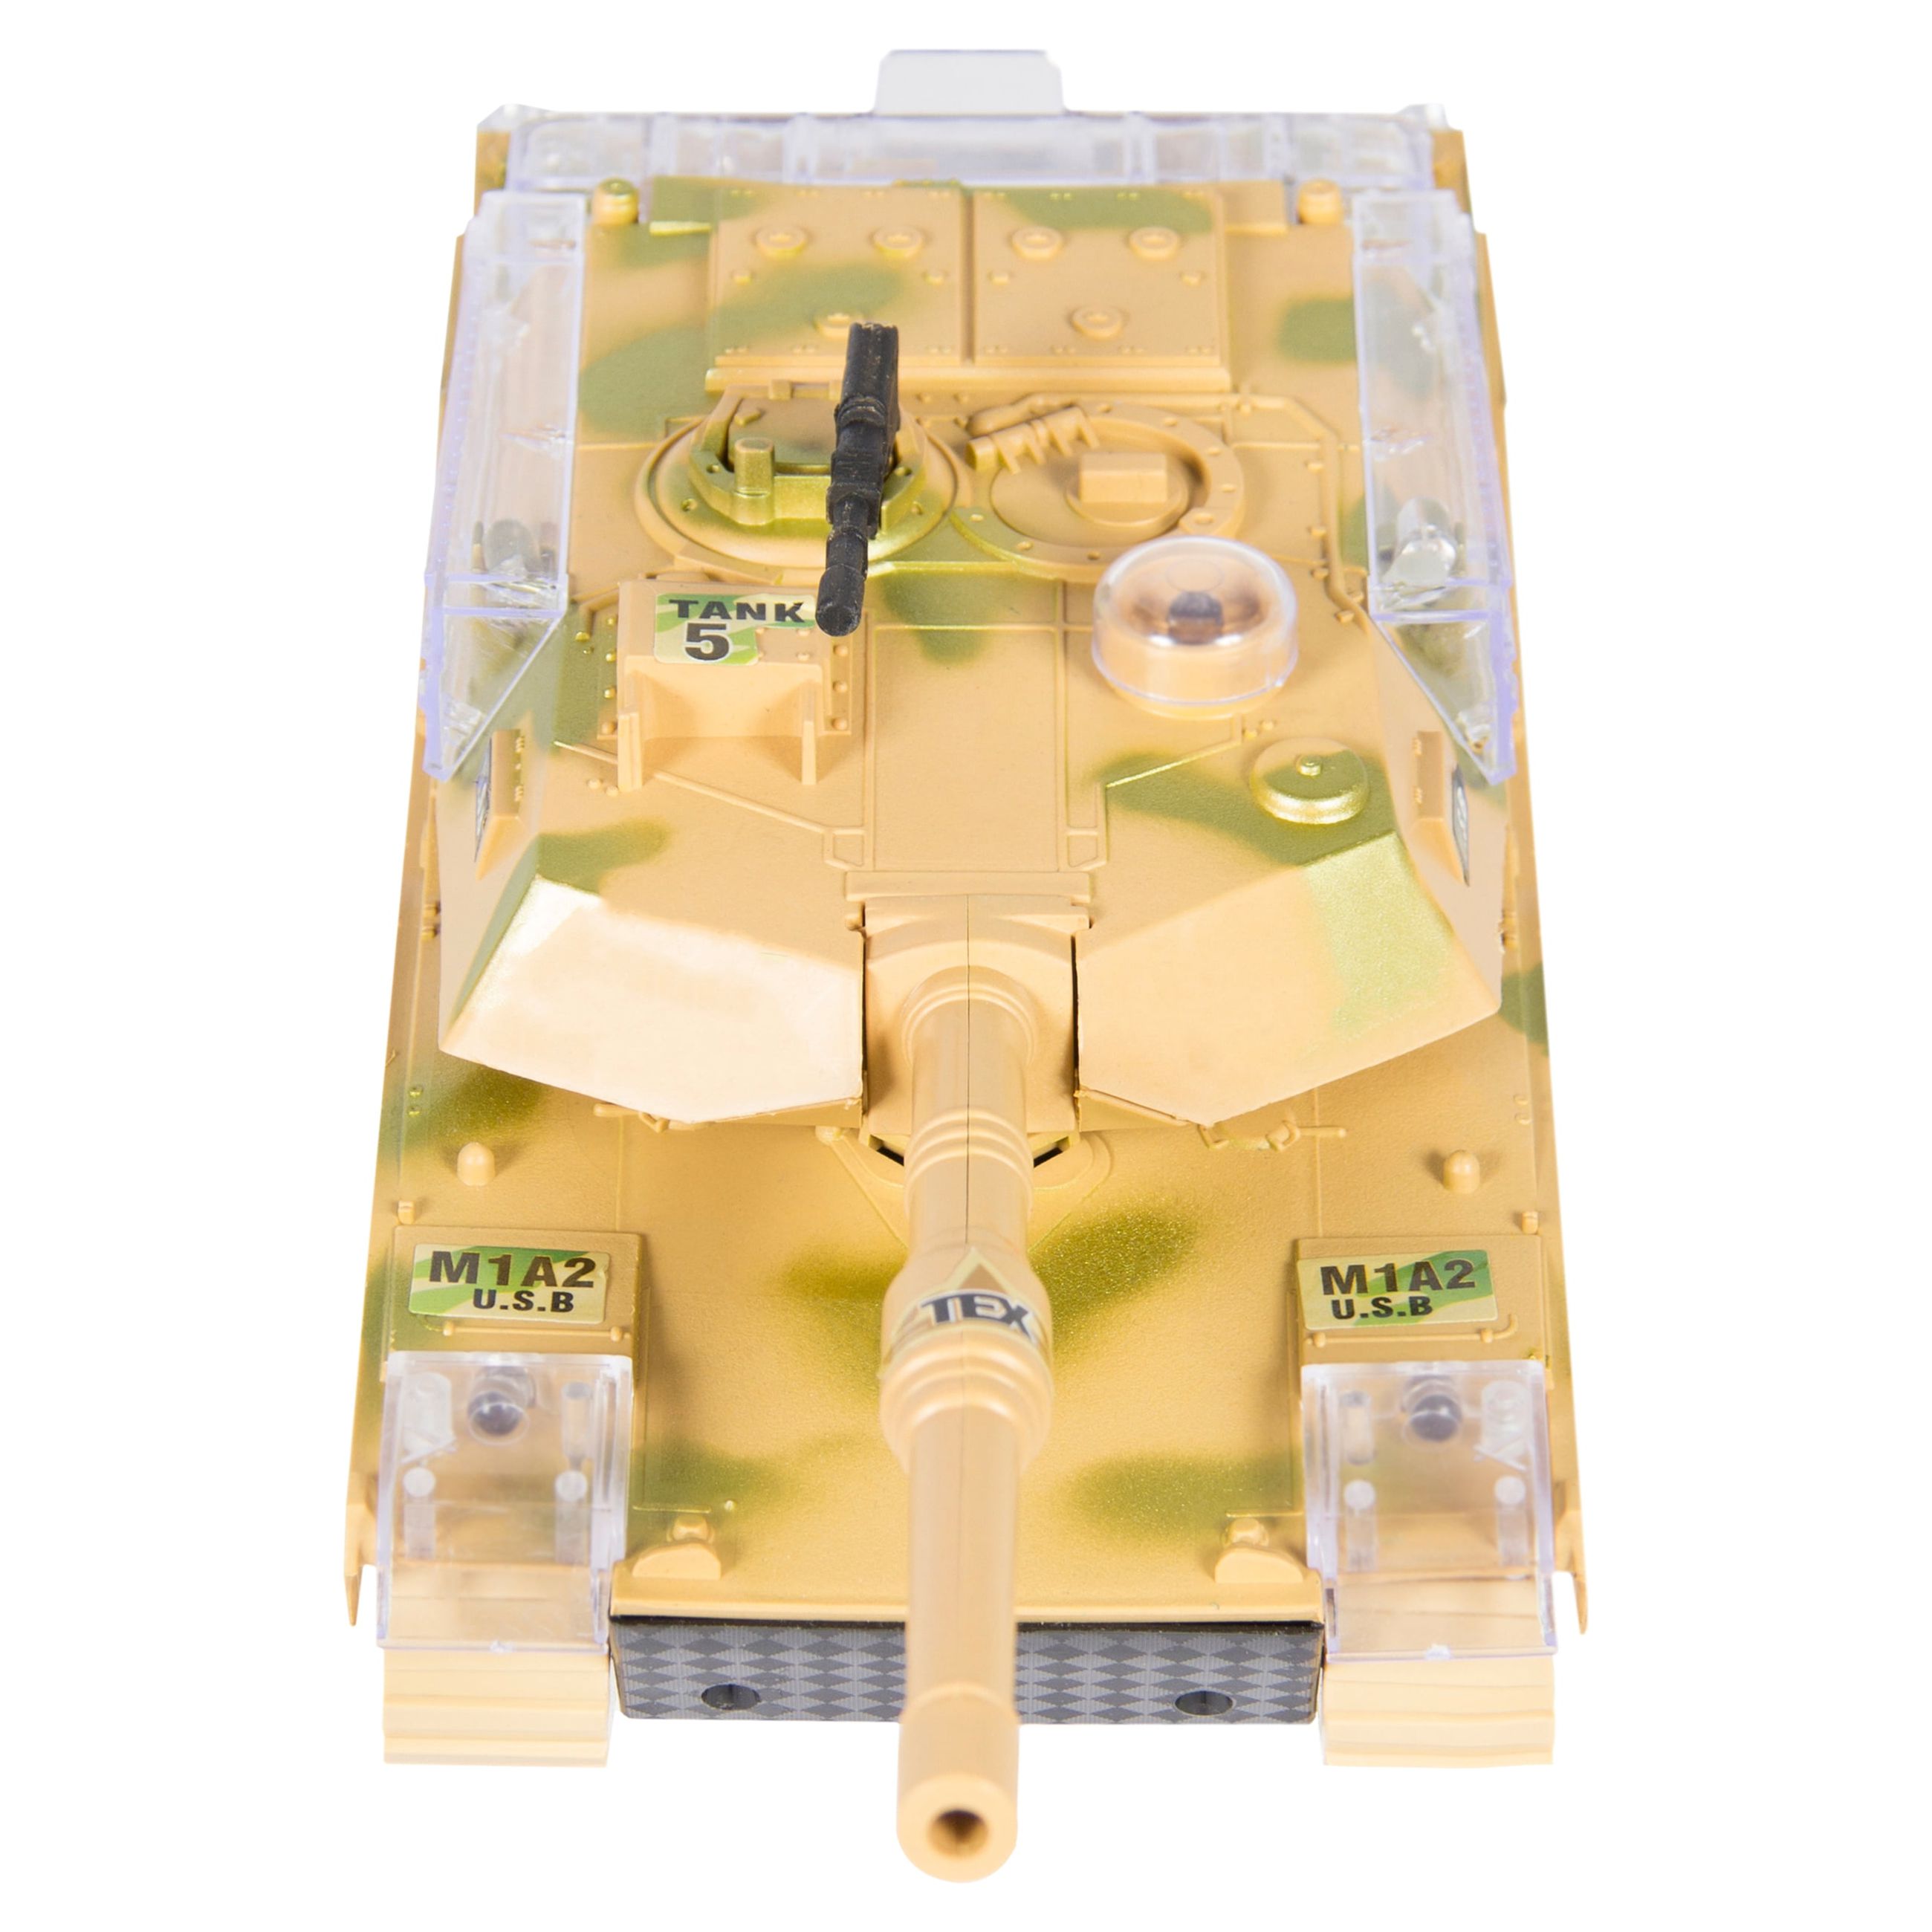 Best Choice Products Kids Military Army Tank Toy w/ Flashing Lights and Sound, Bump and Go Action - Beige - image 3 of 5